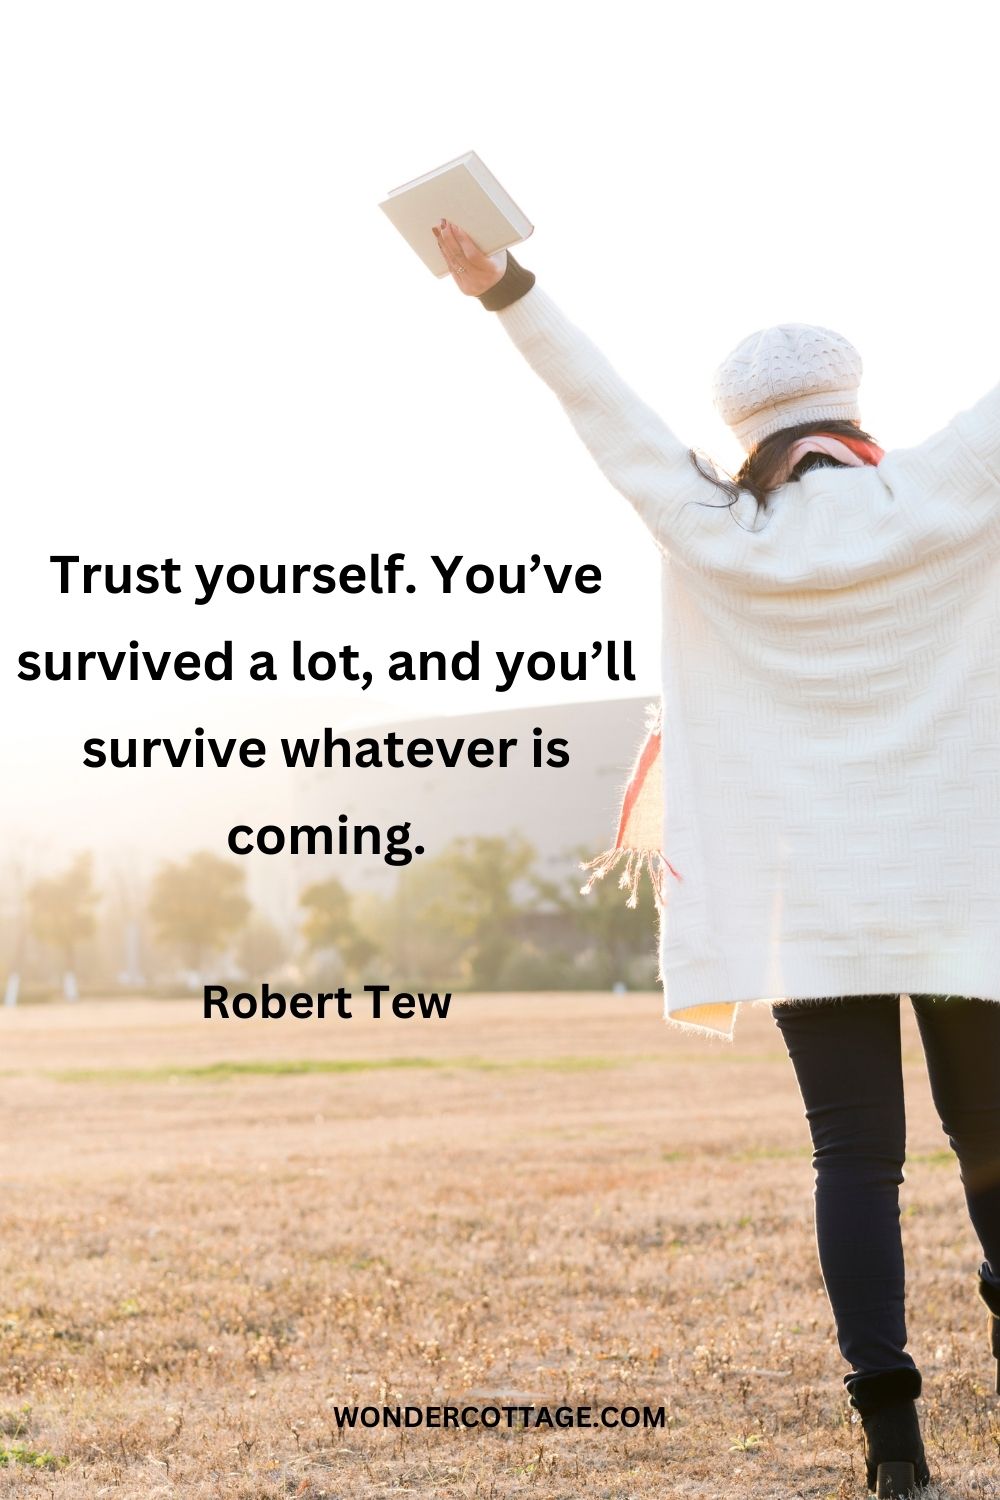 Trust yourself. You’ve survived a lot, and you’ll survive whatever is coming. Robert Tew